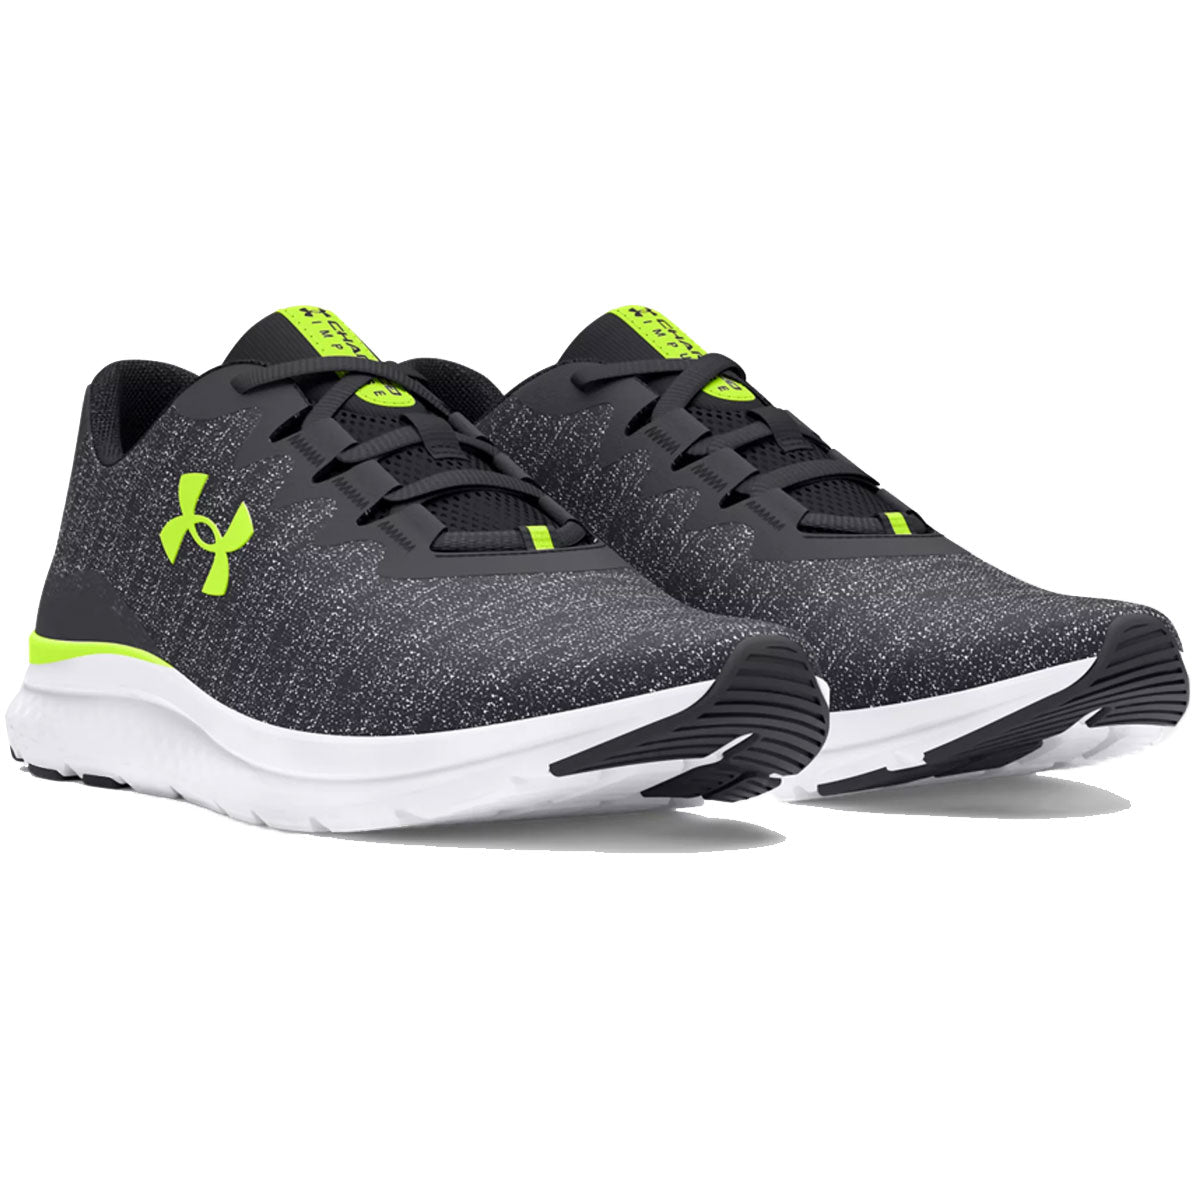 Under Armour Charged Impulse 3 Knit Running Shoes - Mens - Anthracite/High Vis Yellow